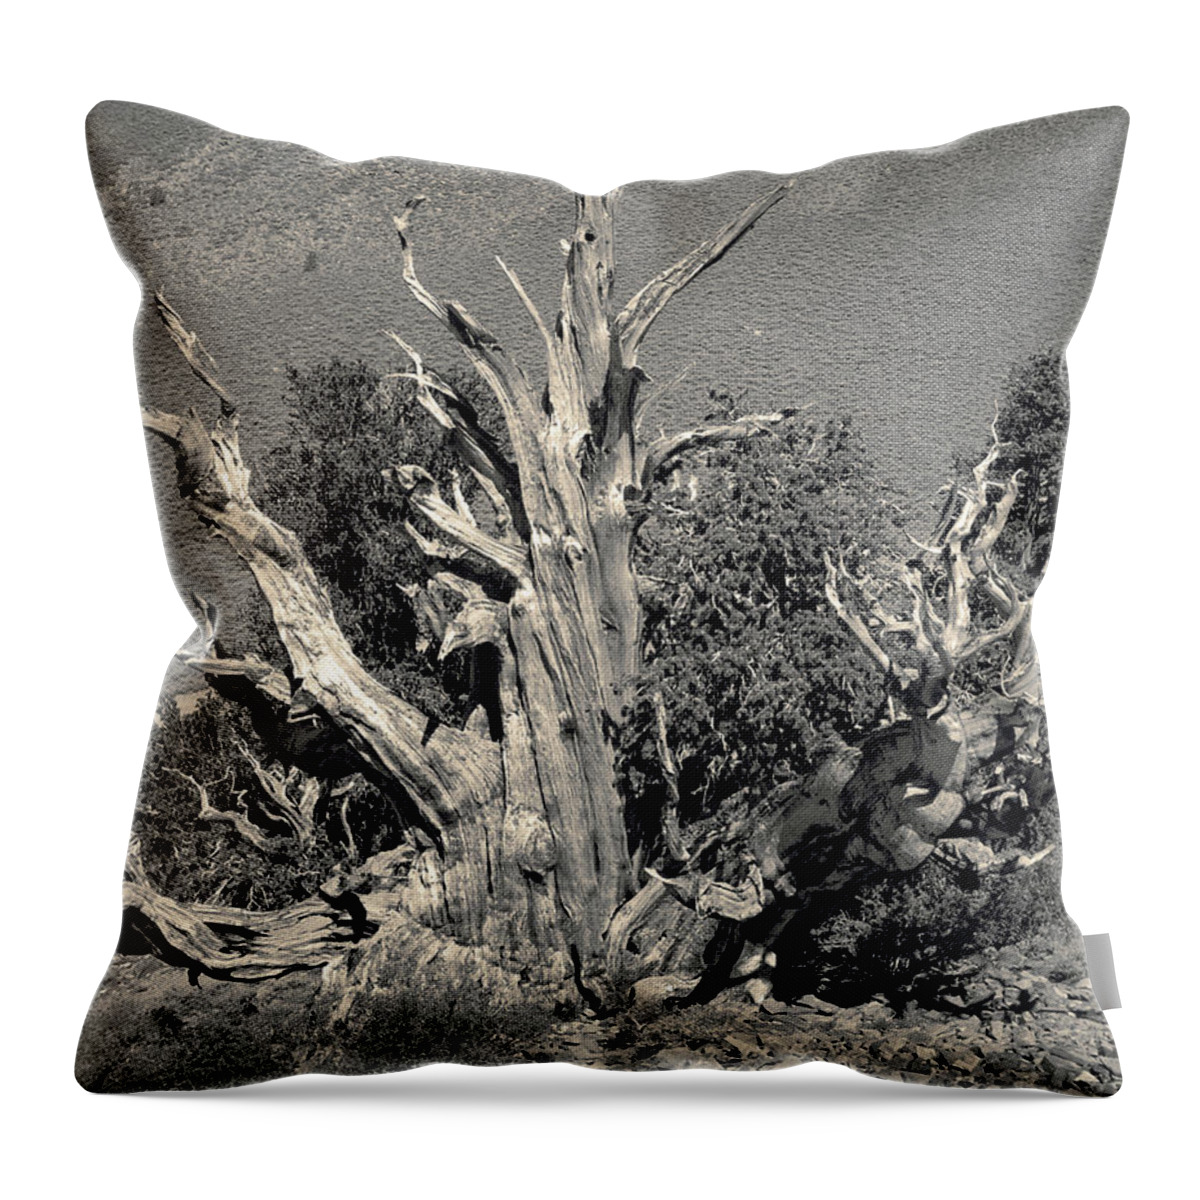 Bristlecone Pine Throw Pillow featuring the photograph Ancient Bristlecone Pine Tree, Composition 9 selenium sepia toned, Inyo National Forest, California by Kathy Anselmo